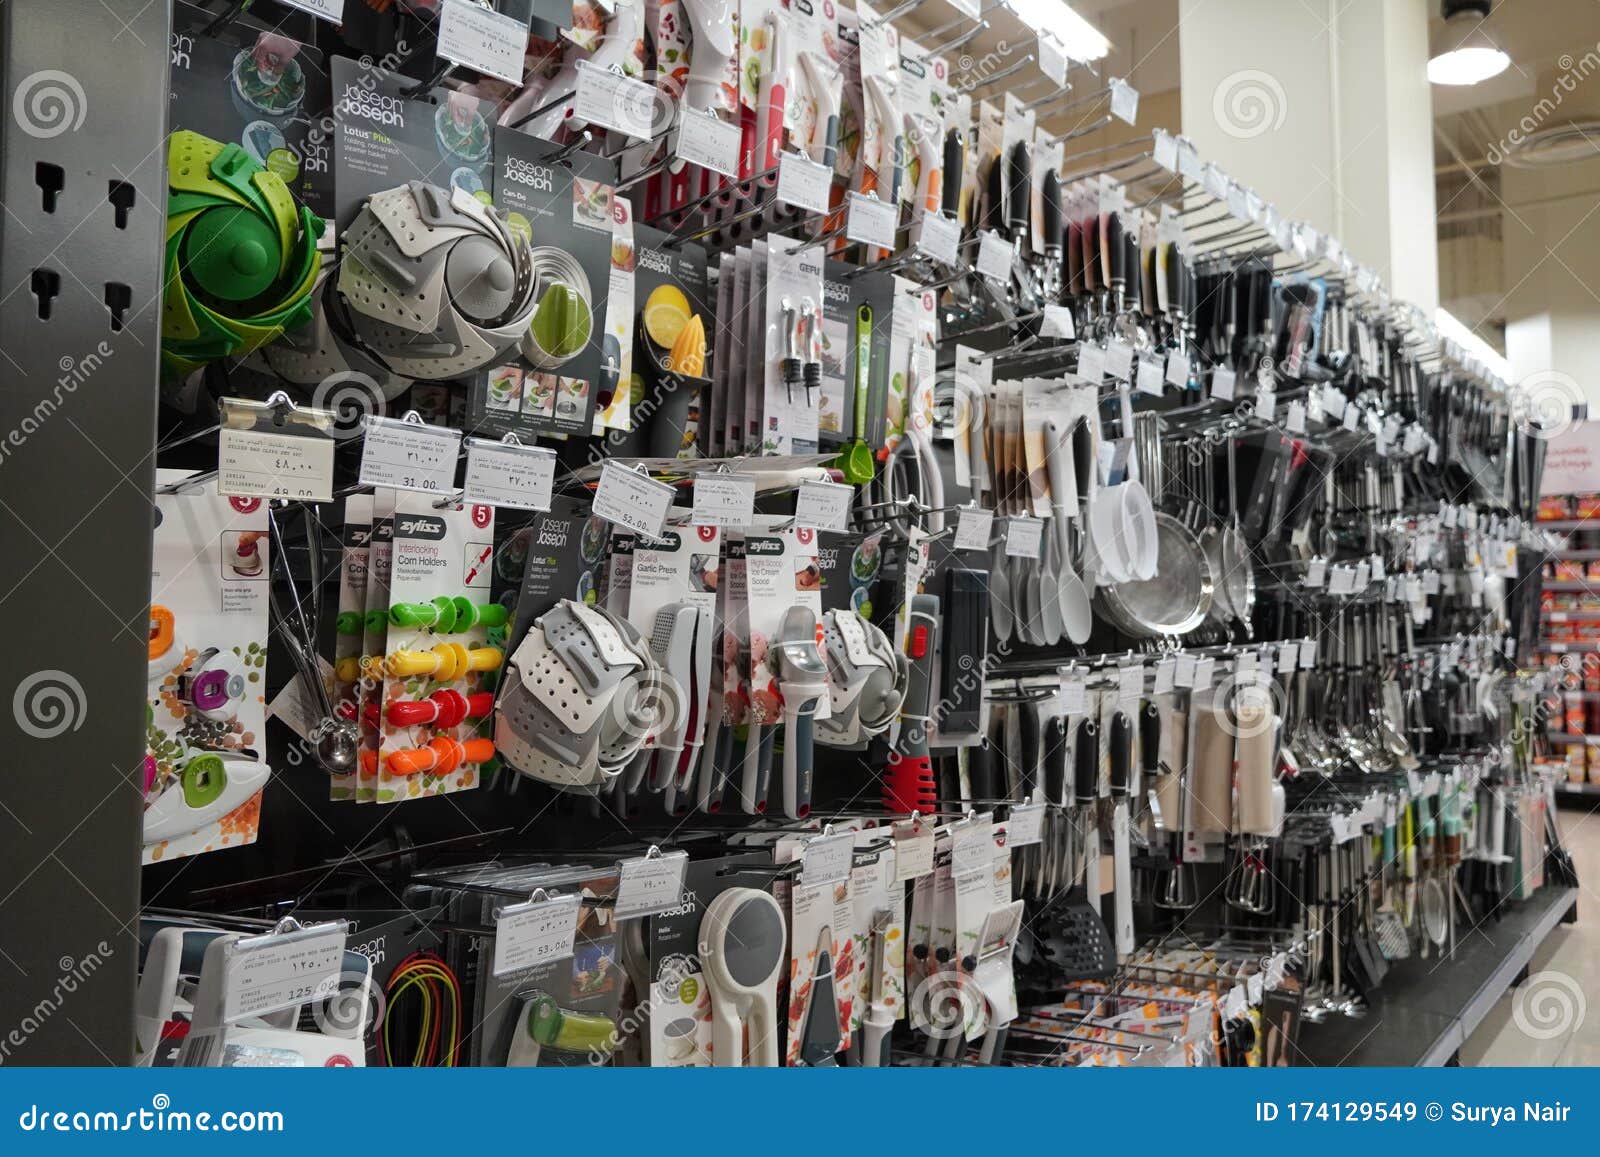 Kitchen Tools Hanging in Shop. Large Set and Variety of Different ...